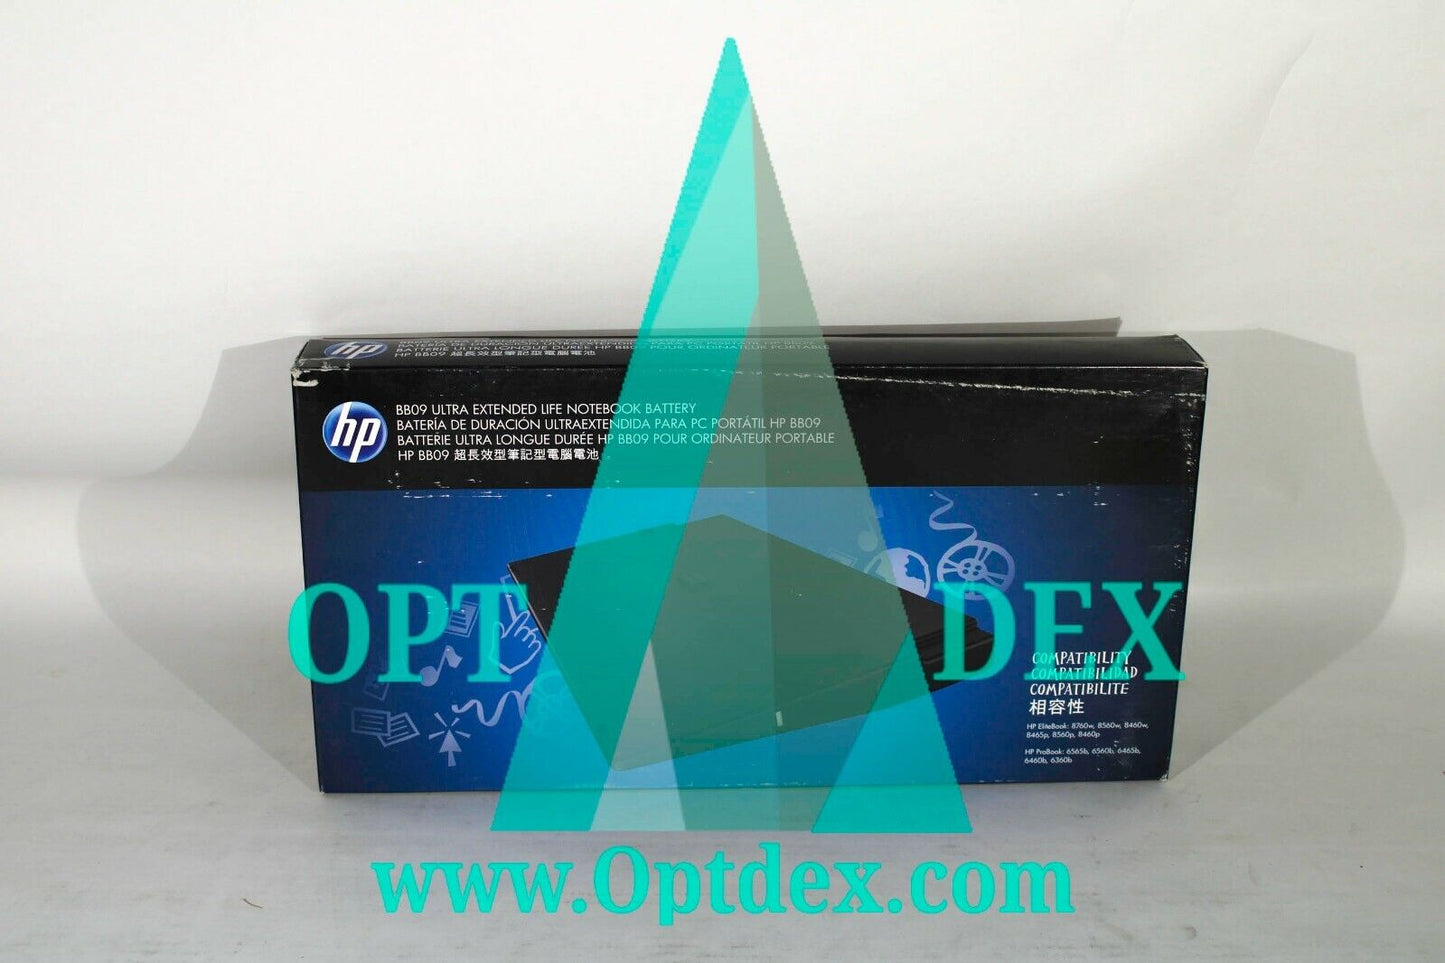 HPE BB09 Ultra Extended Life Notebook Battery QK640AA